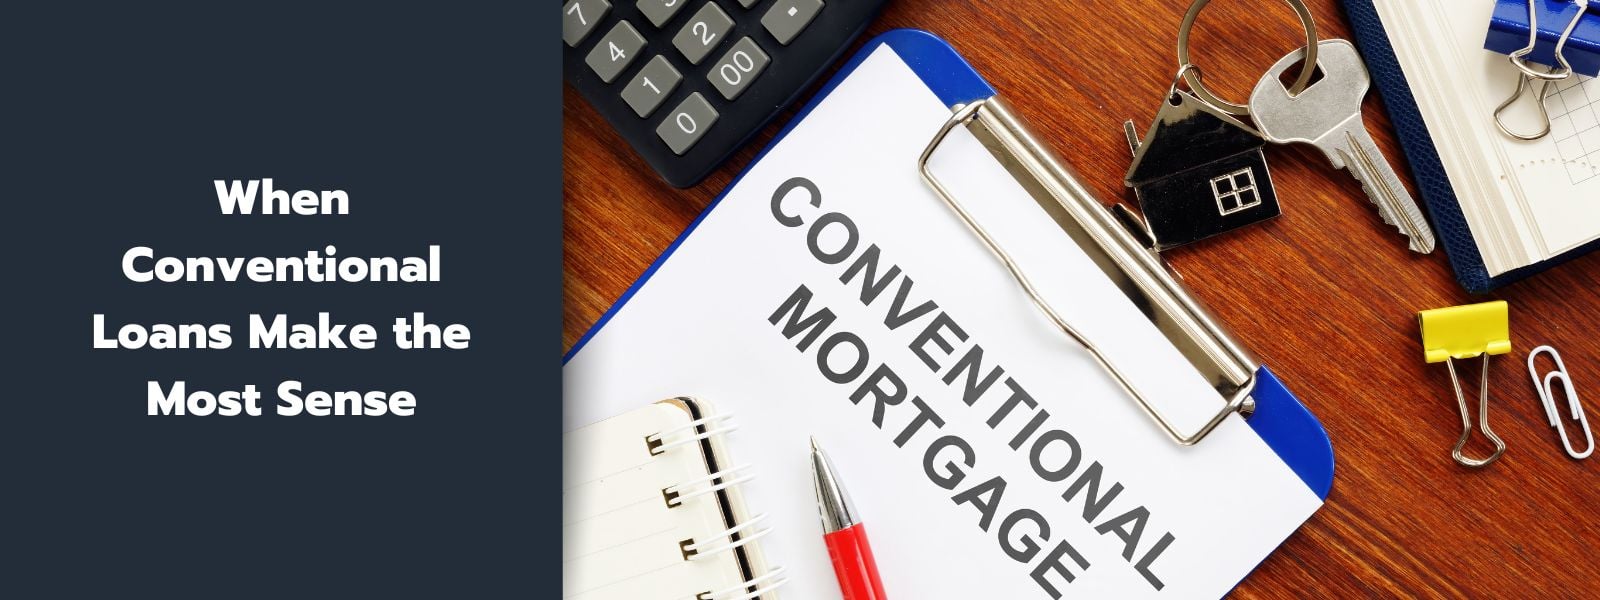 When Conventional Loans Make the Most Sense